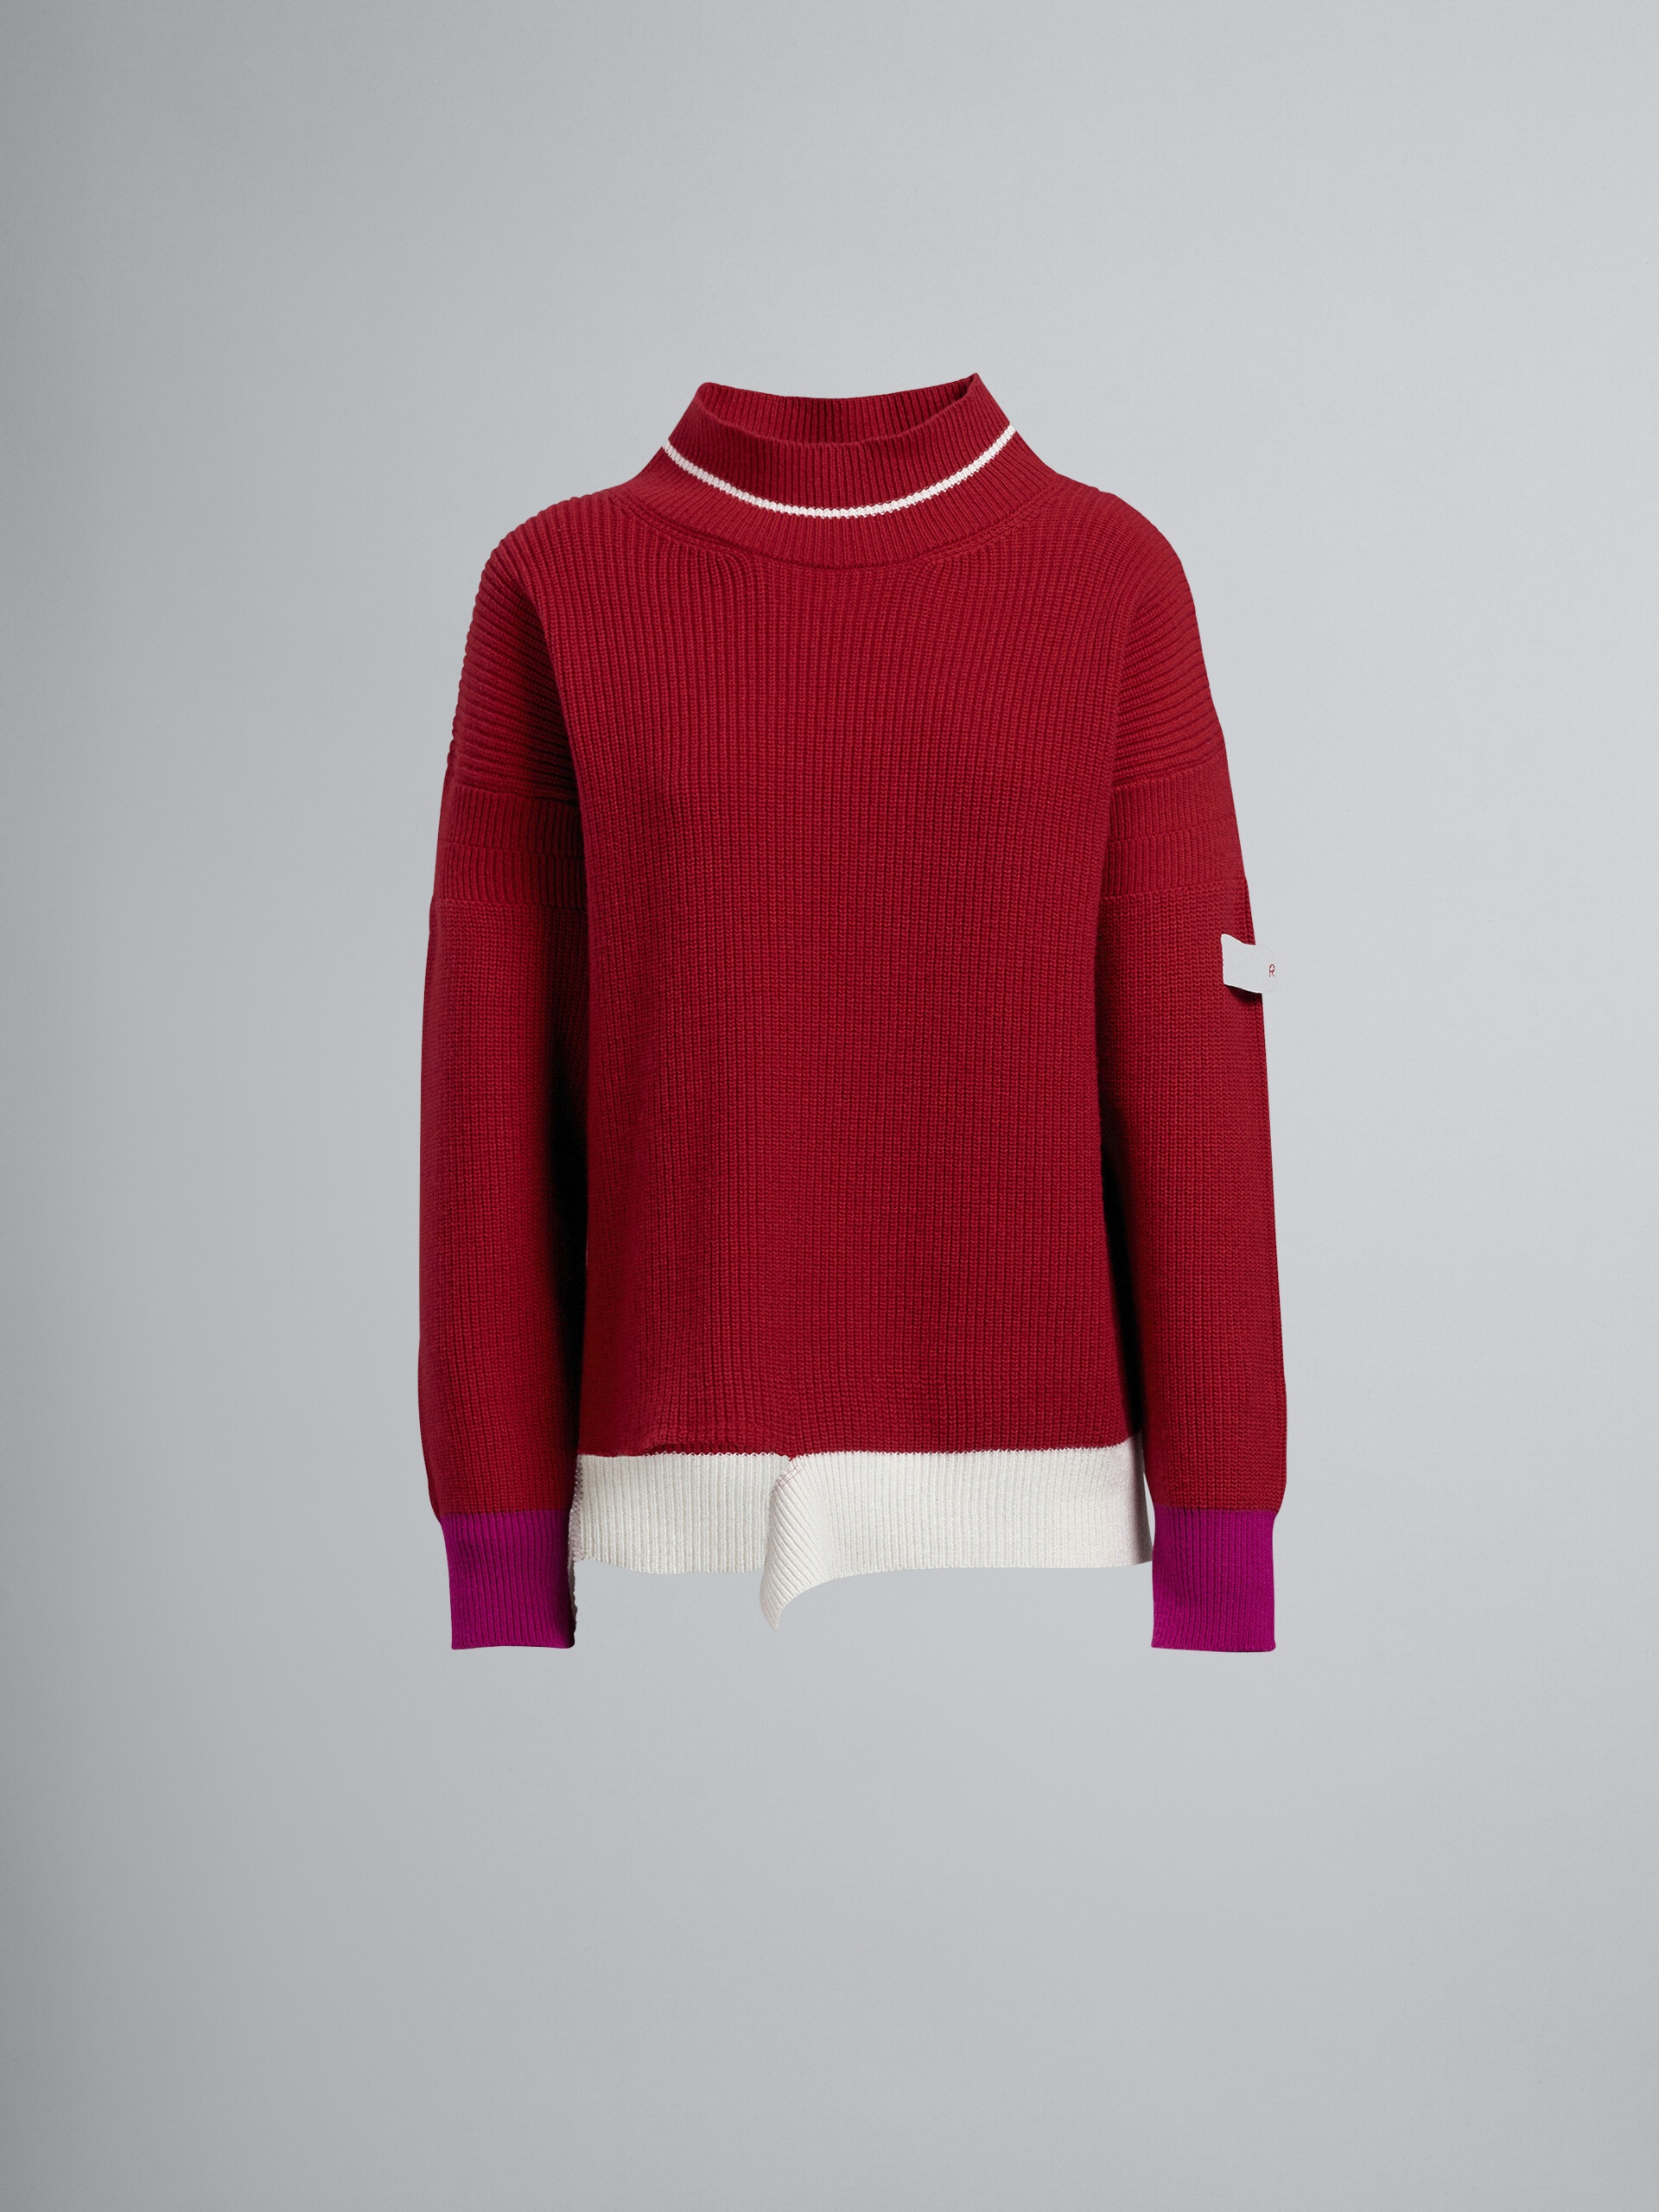 Shetland wool and cotton T-neck sweater - Pullovers - Image 1